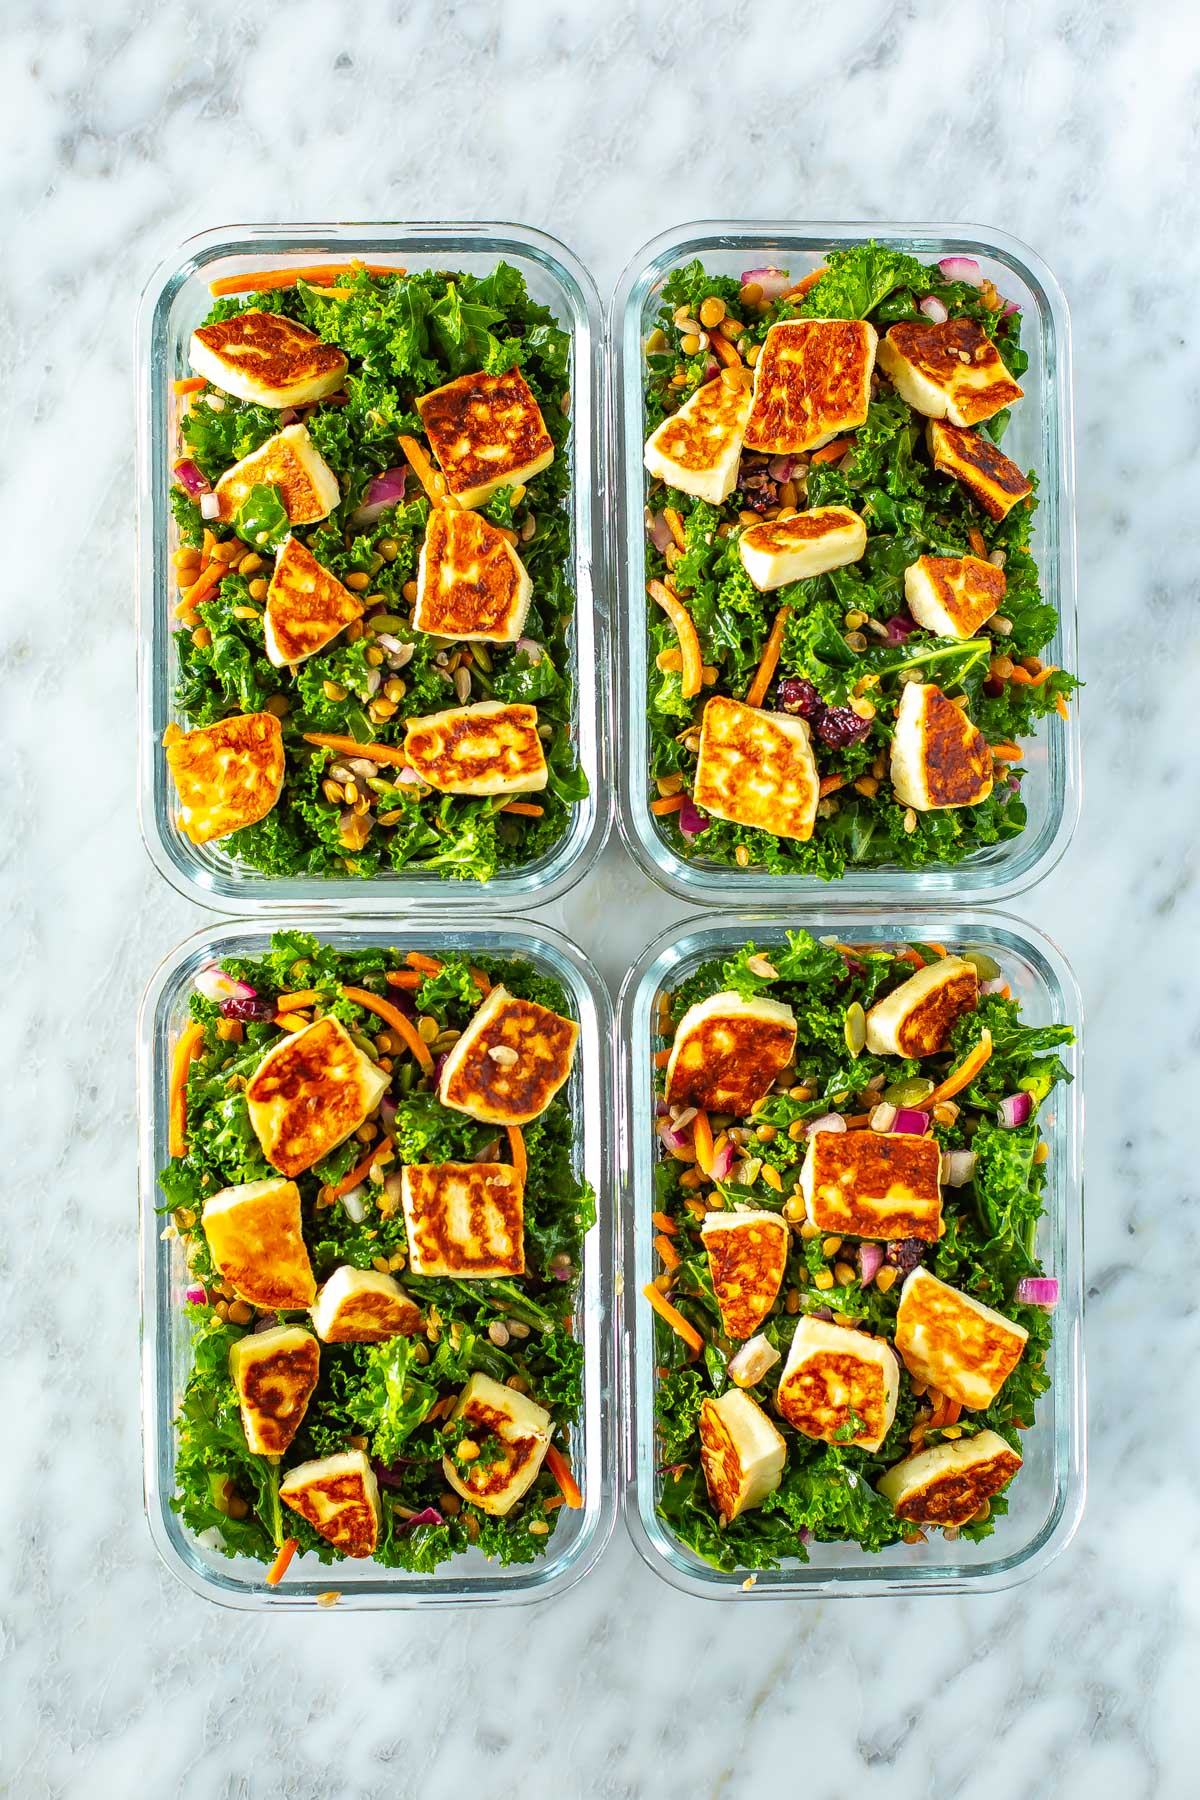 Four meal prep containers, each filled with kale salad topped with halloumi cheese.